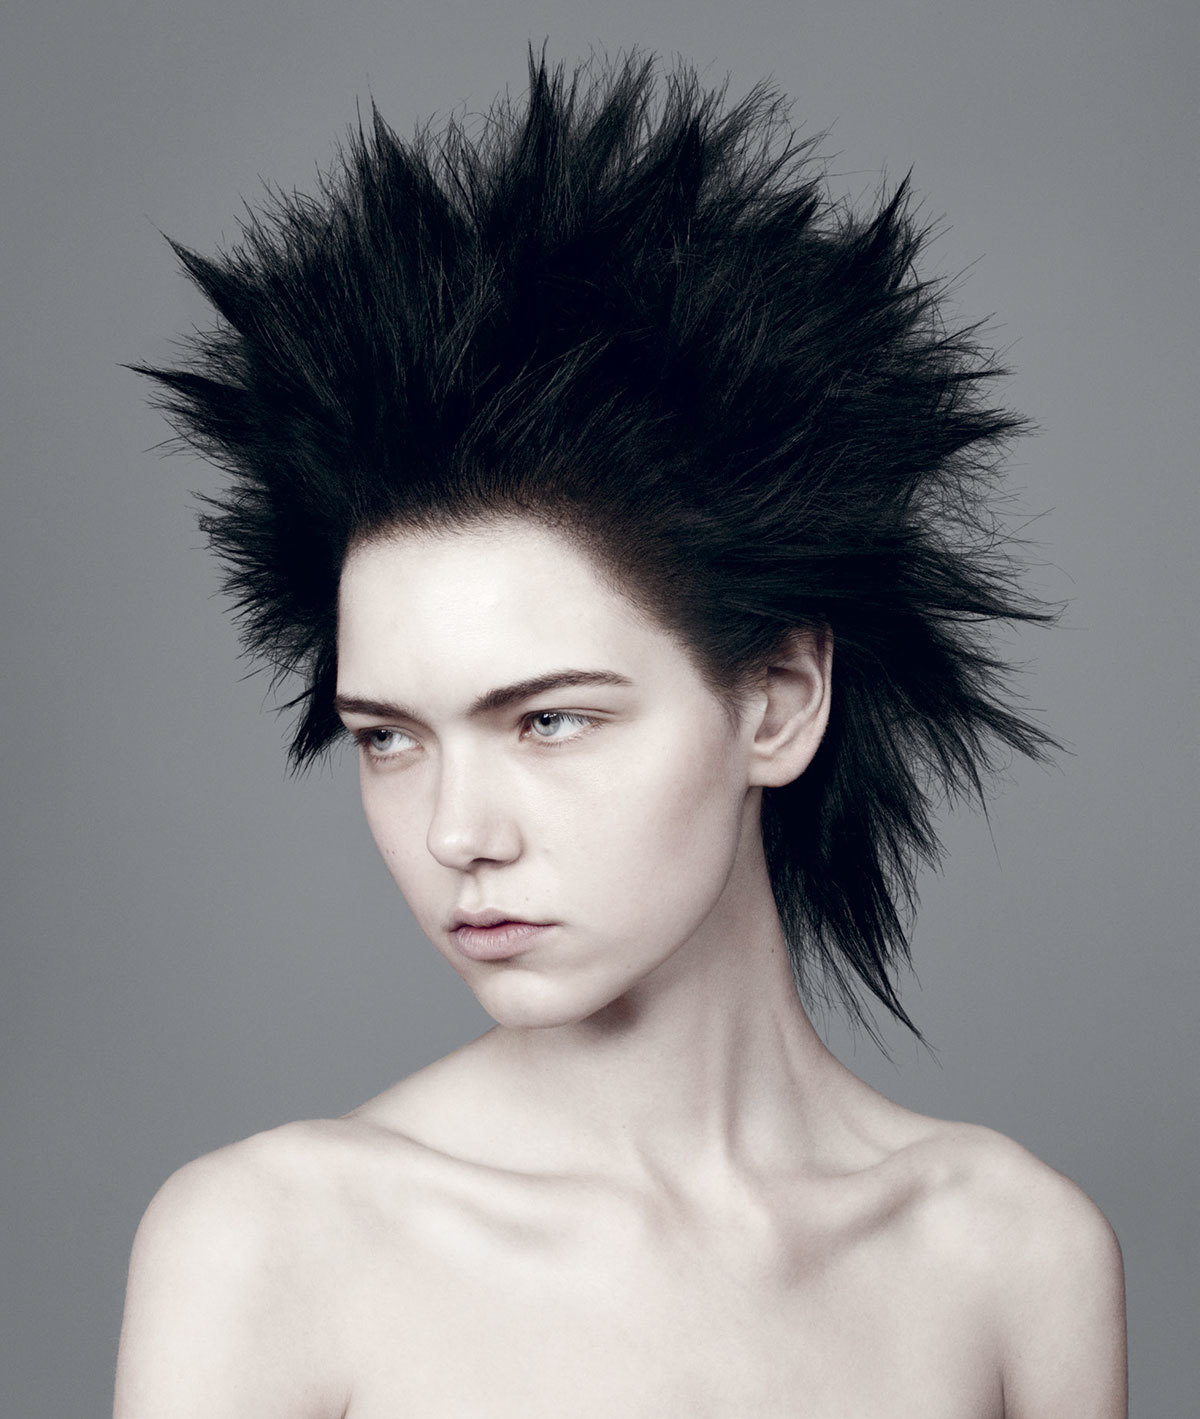 what guido talks about when he talks about hair - i-D